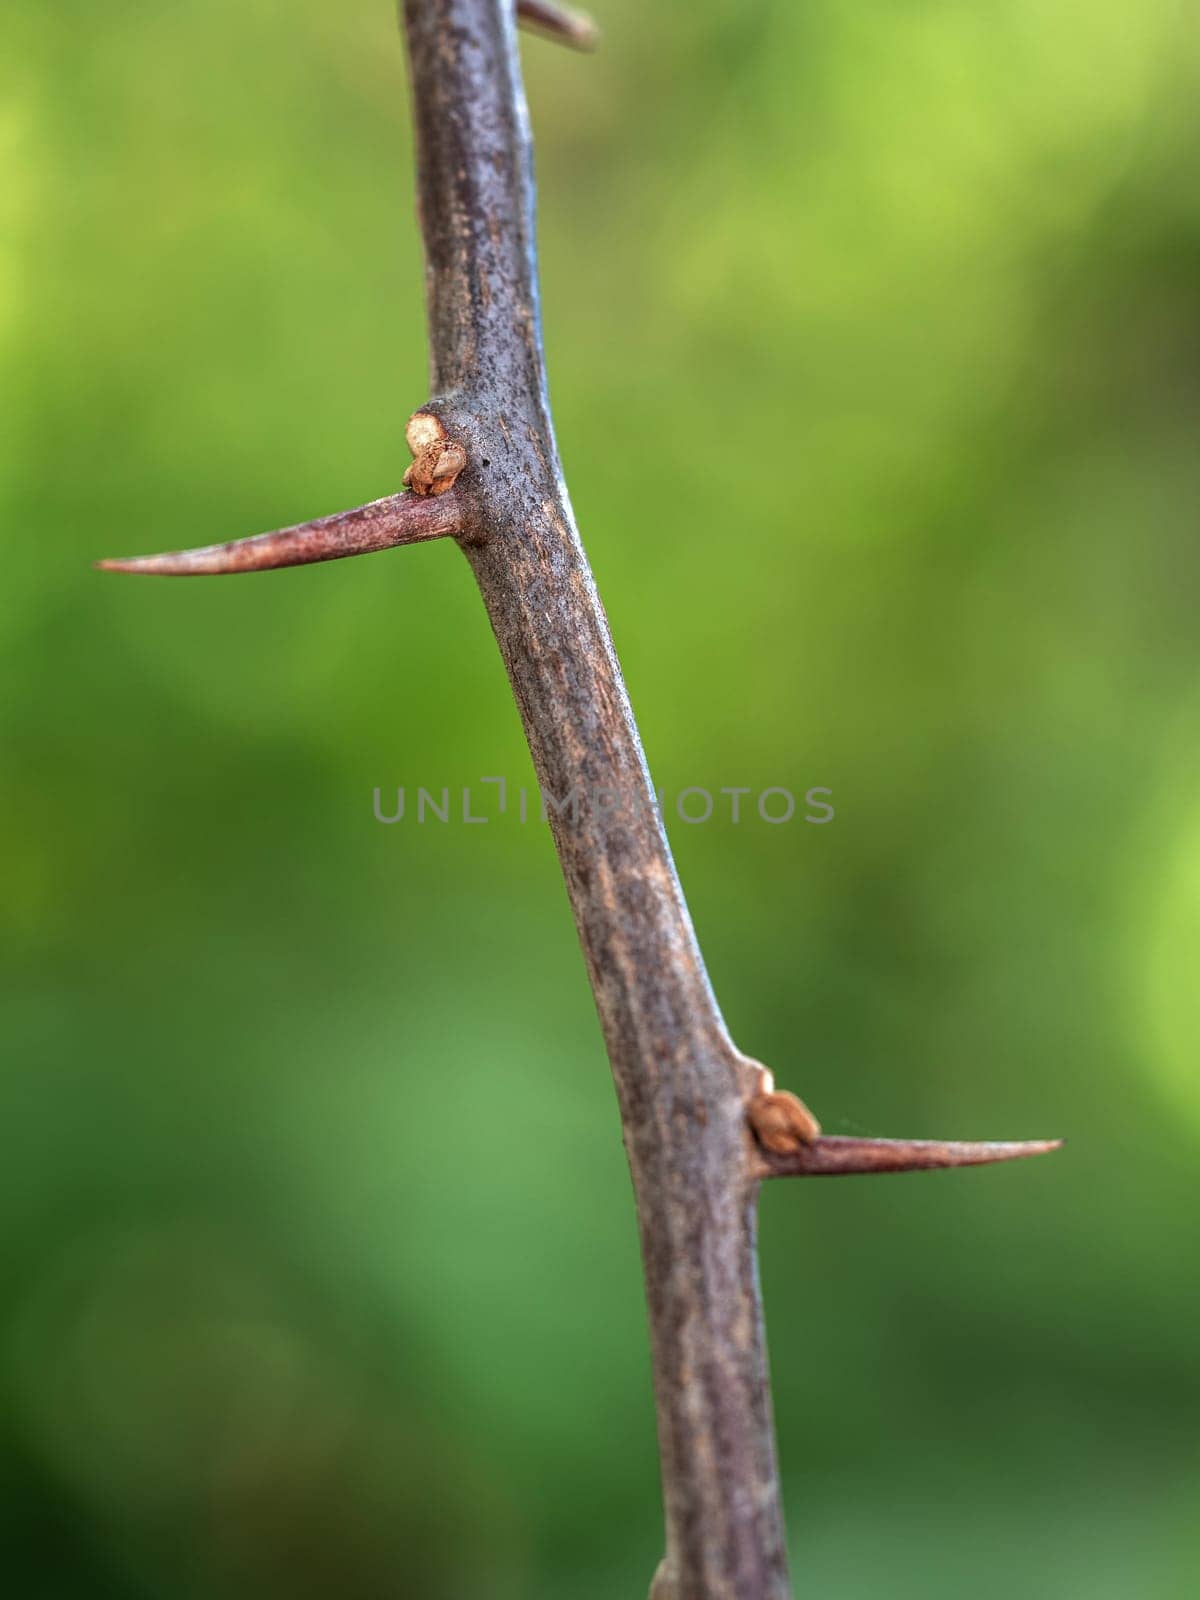 Sharp thorns on the Paper flower branches by Satakorn